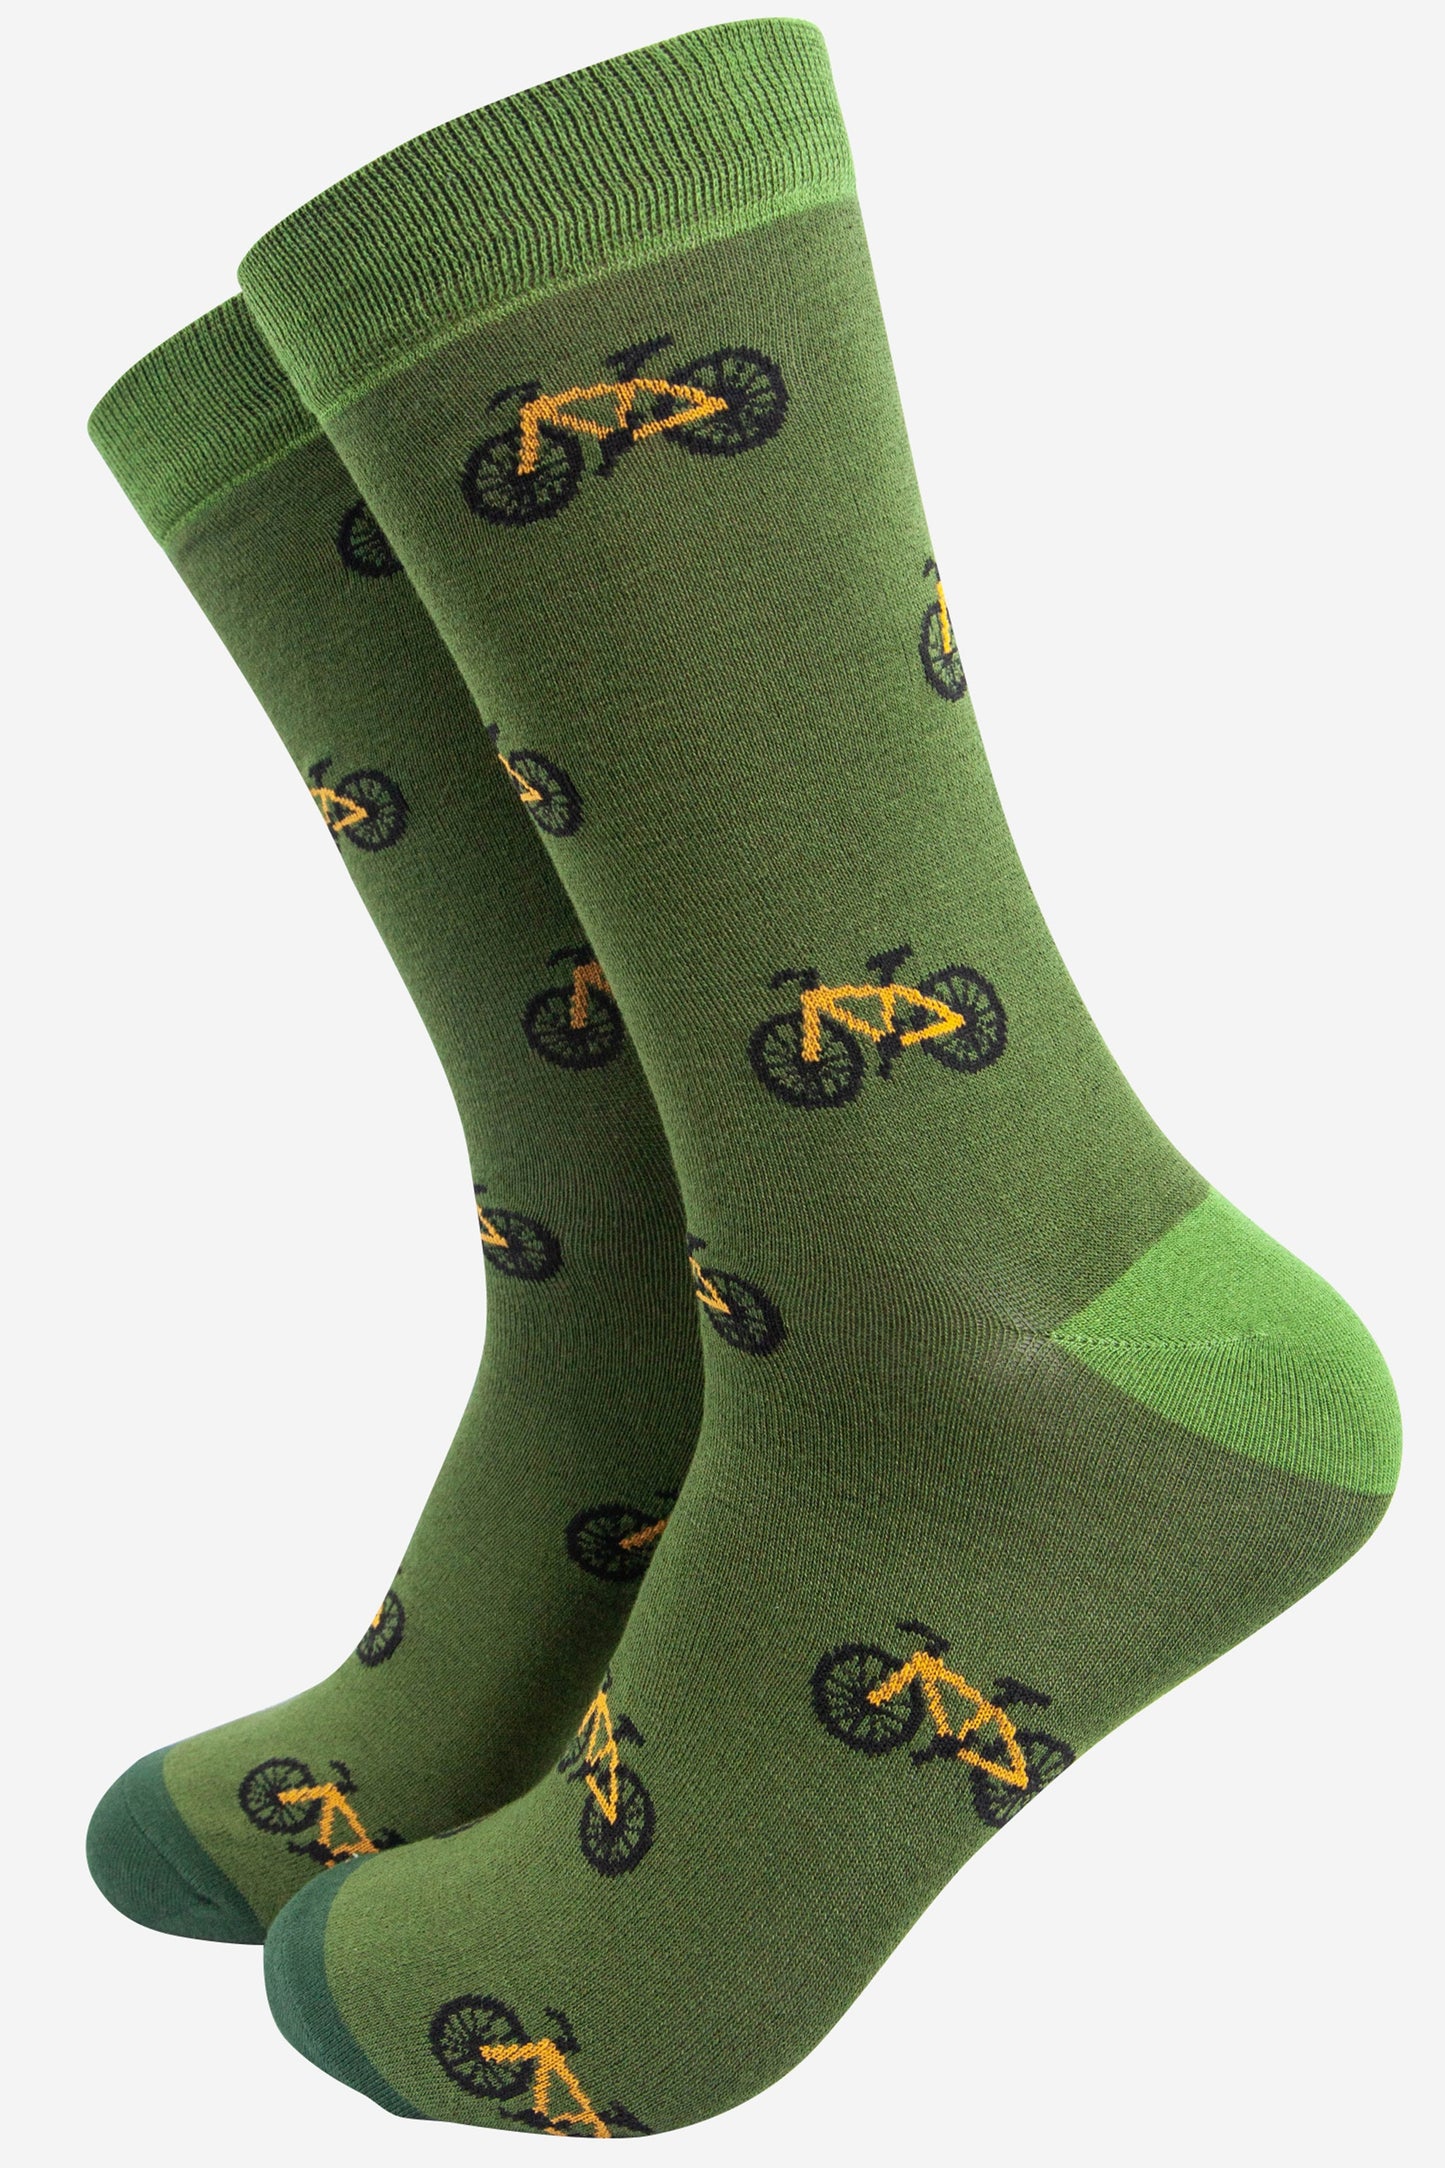 green bamboo socks with an all over pattern of yellow mountain bikes